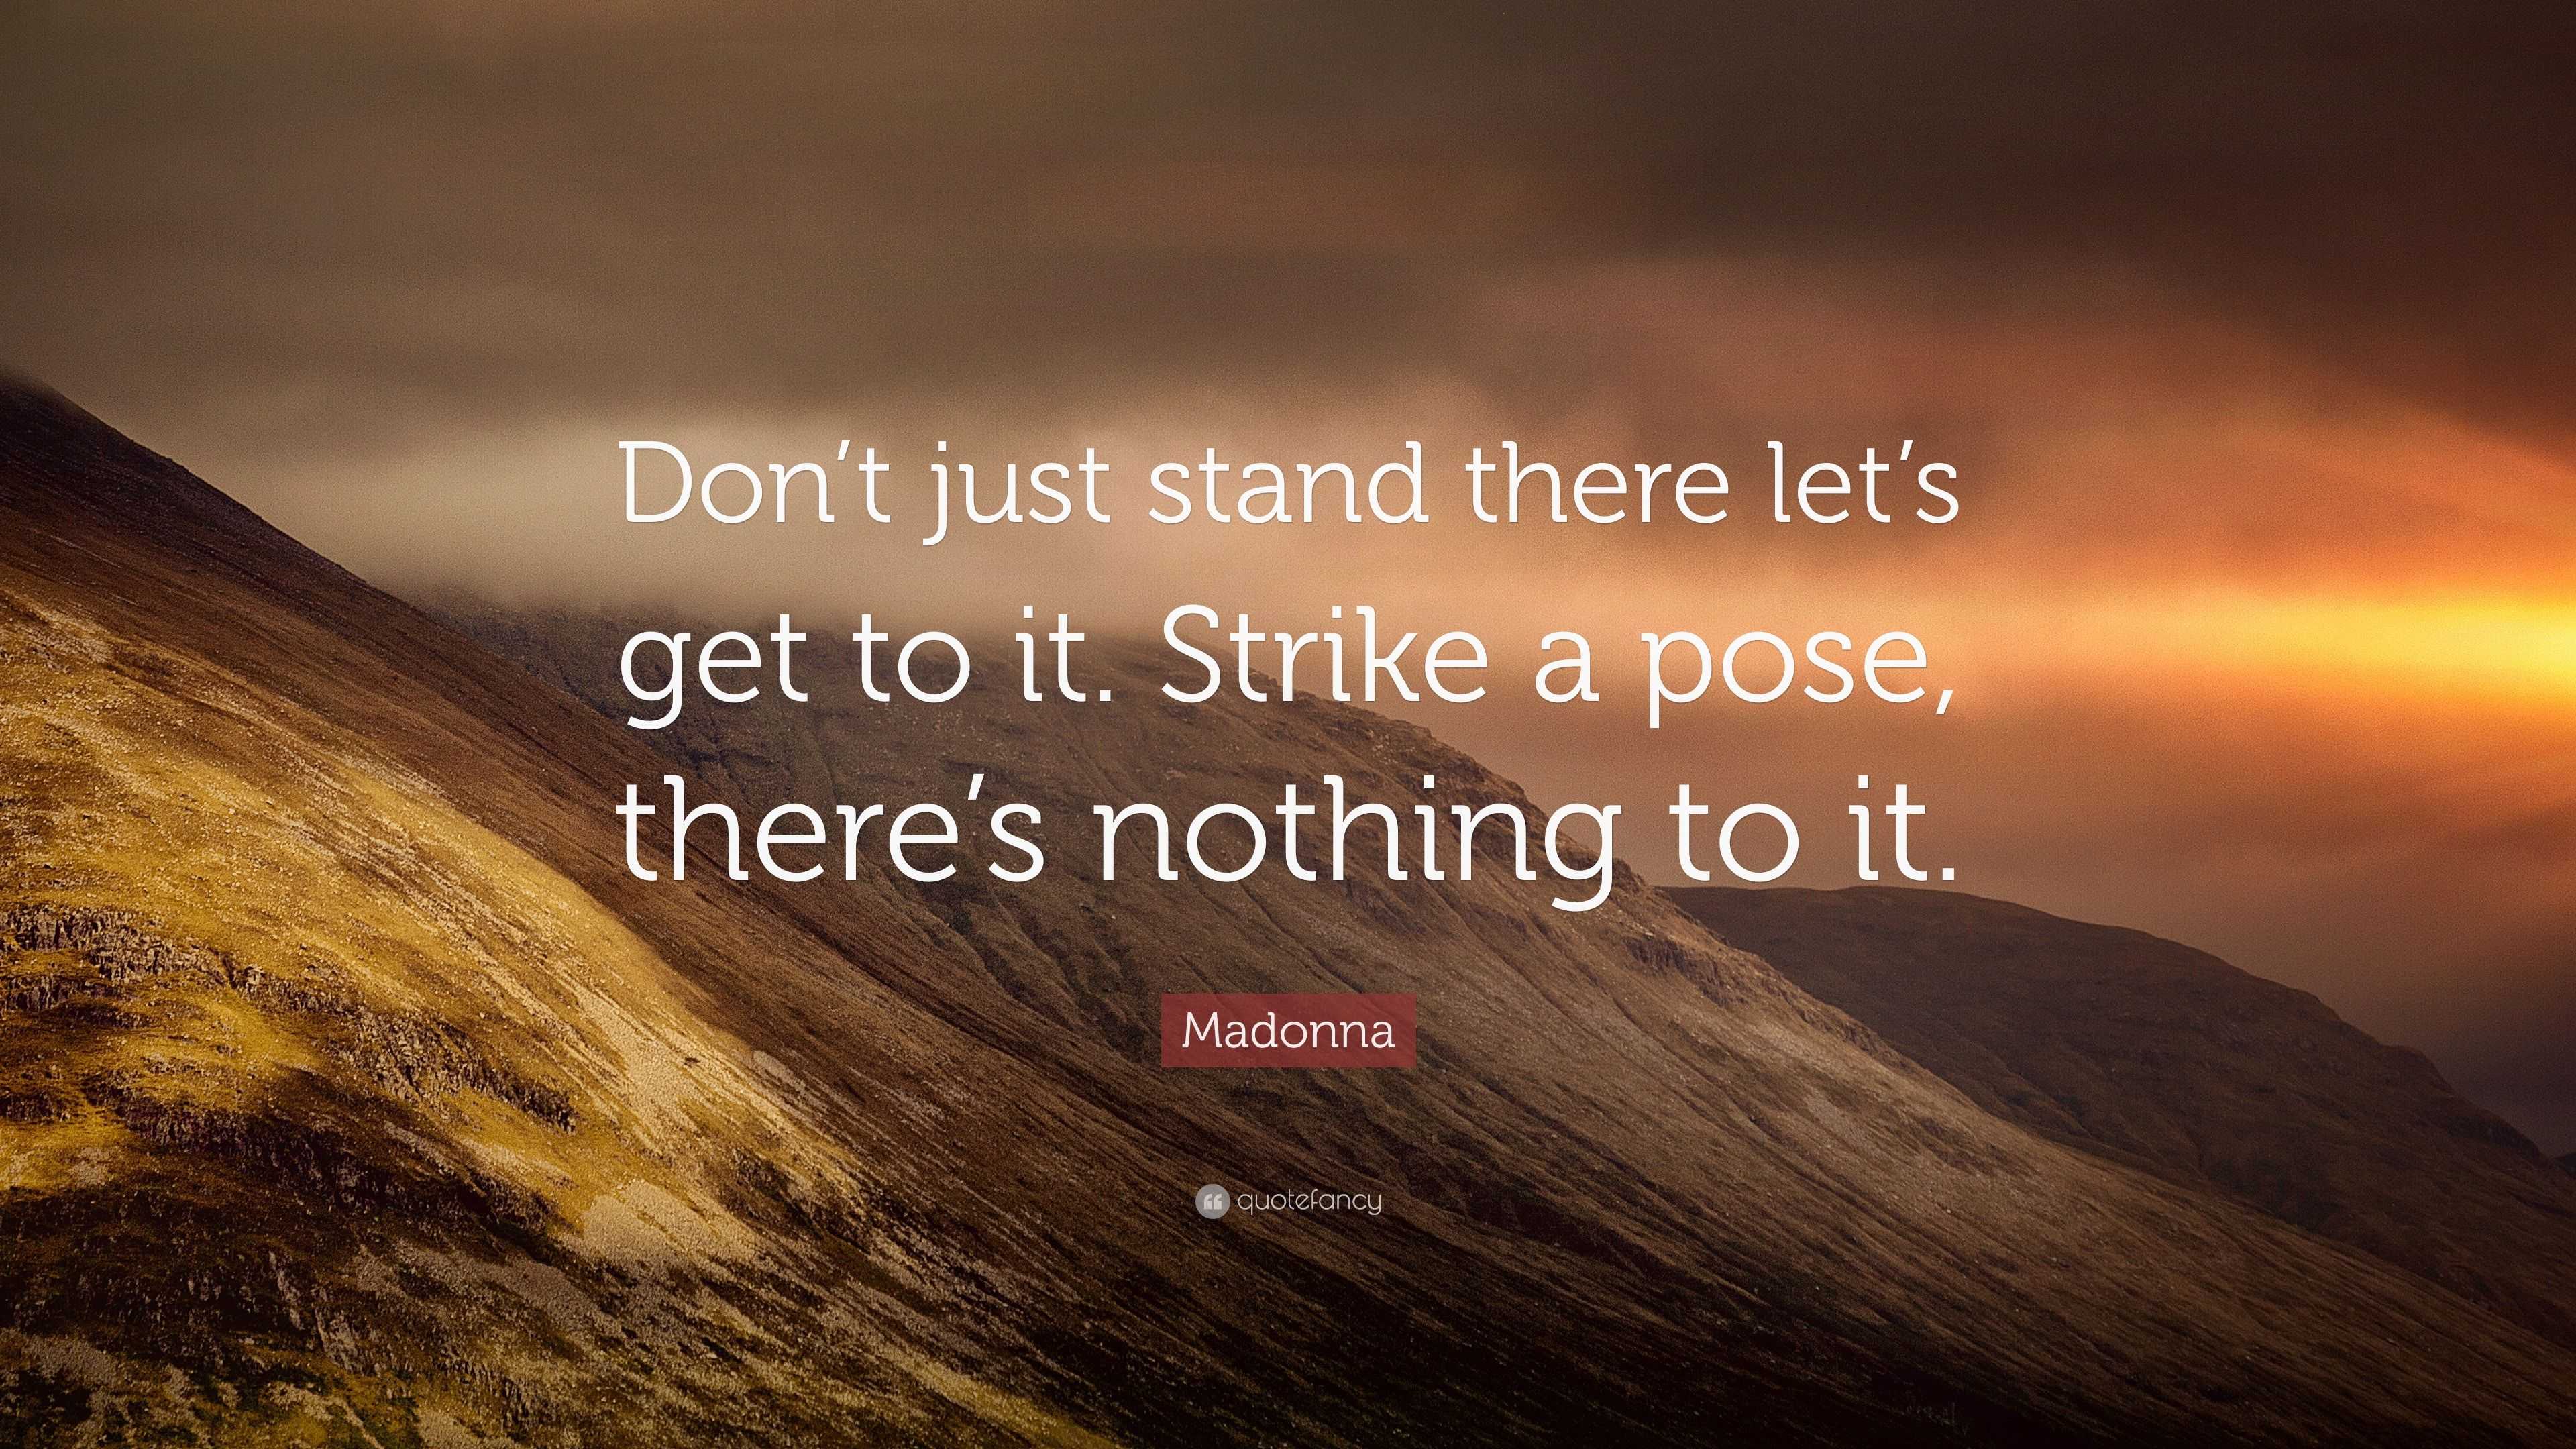 4755160 Madonna Quote Don t just stand there let s get to it Strike a pose